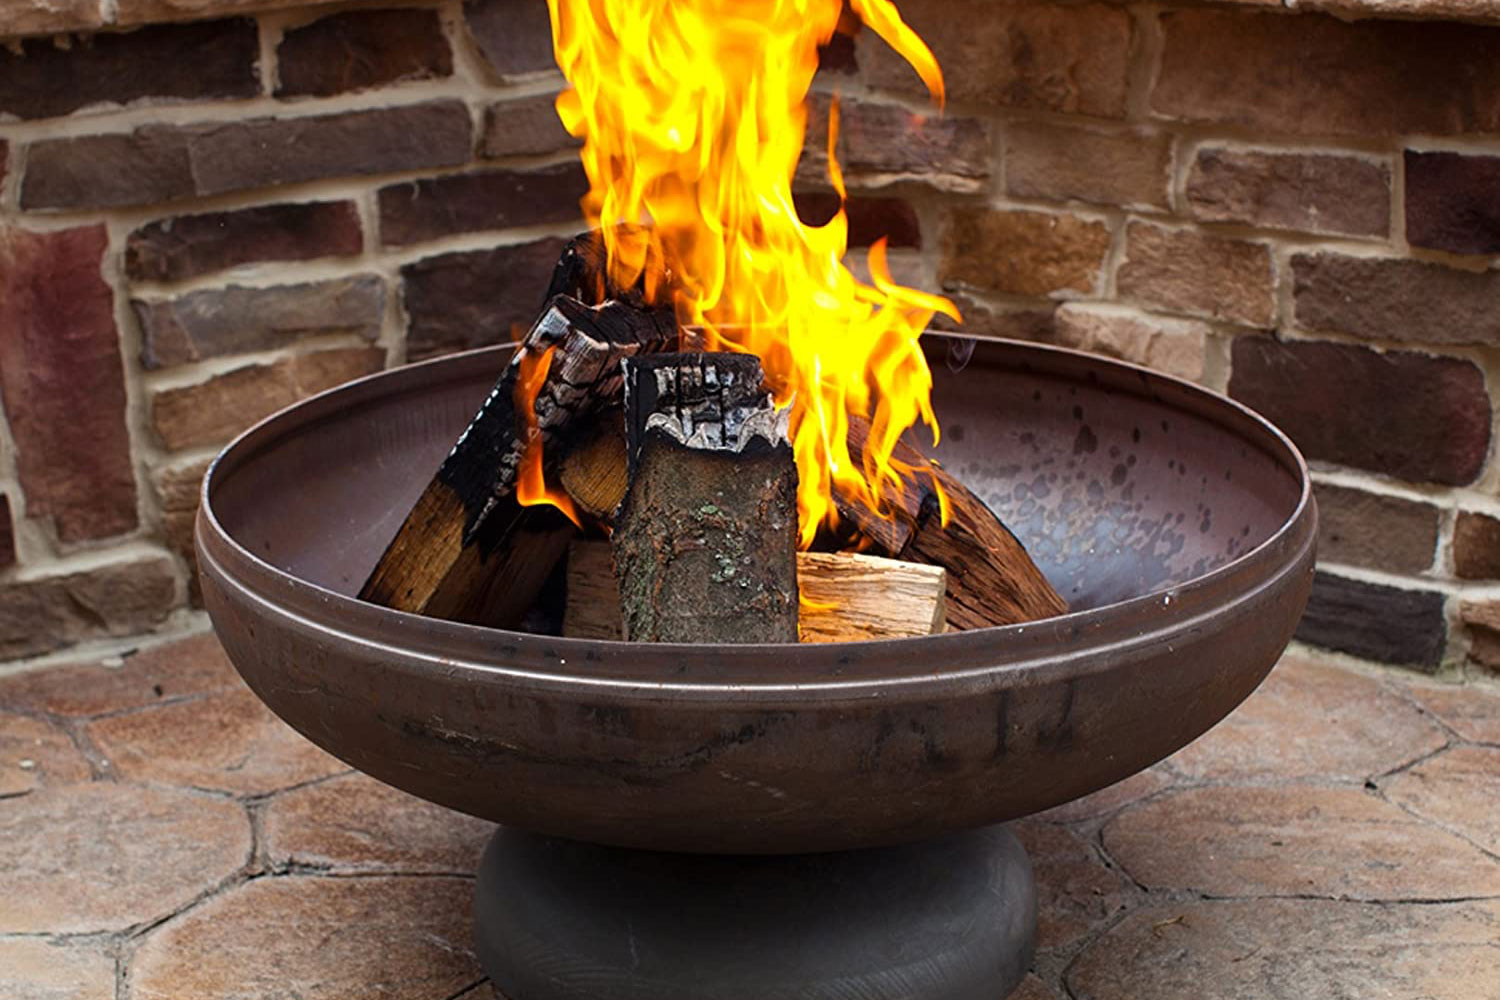 A fire burning in a round metal bowl on a stone patio against a brick wall.